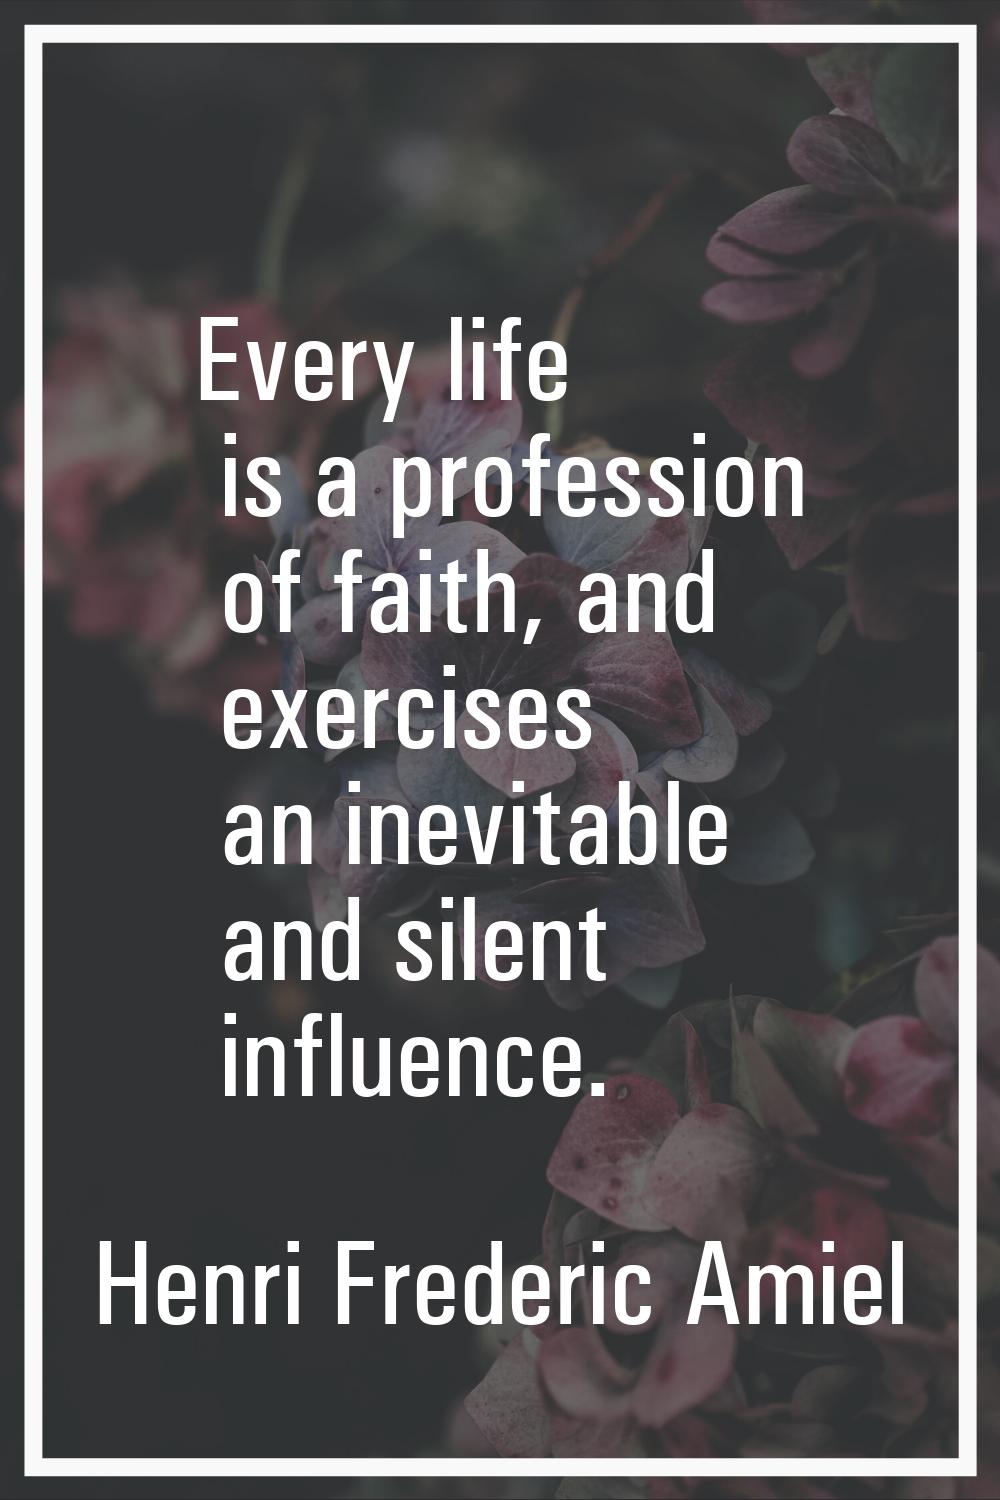 Every life is a profession of faith, and exercises an inevitable and silent influence.